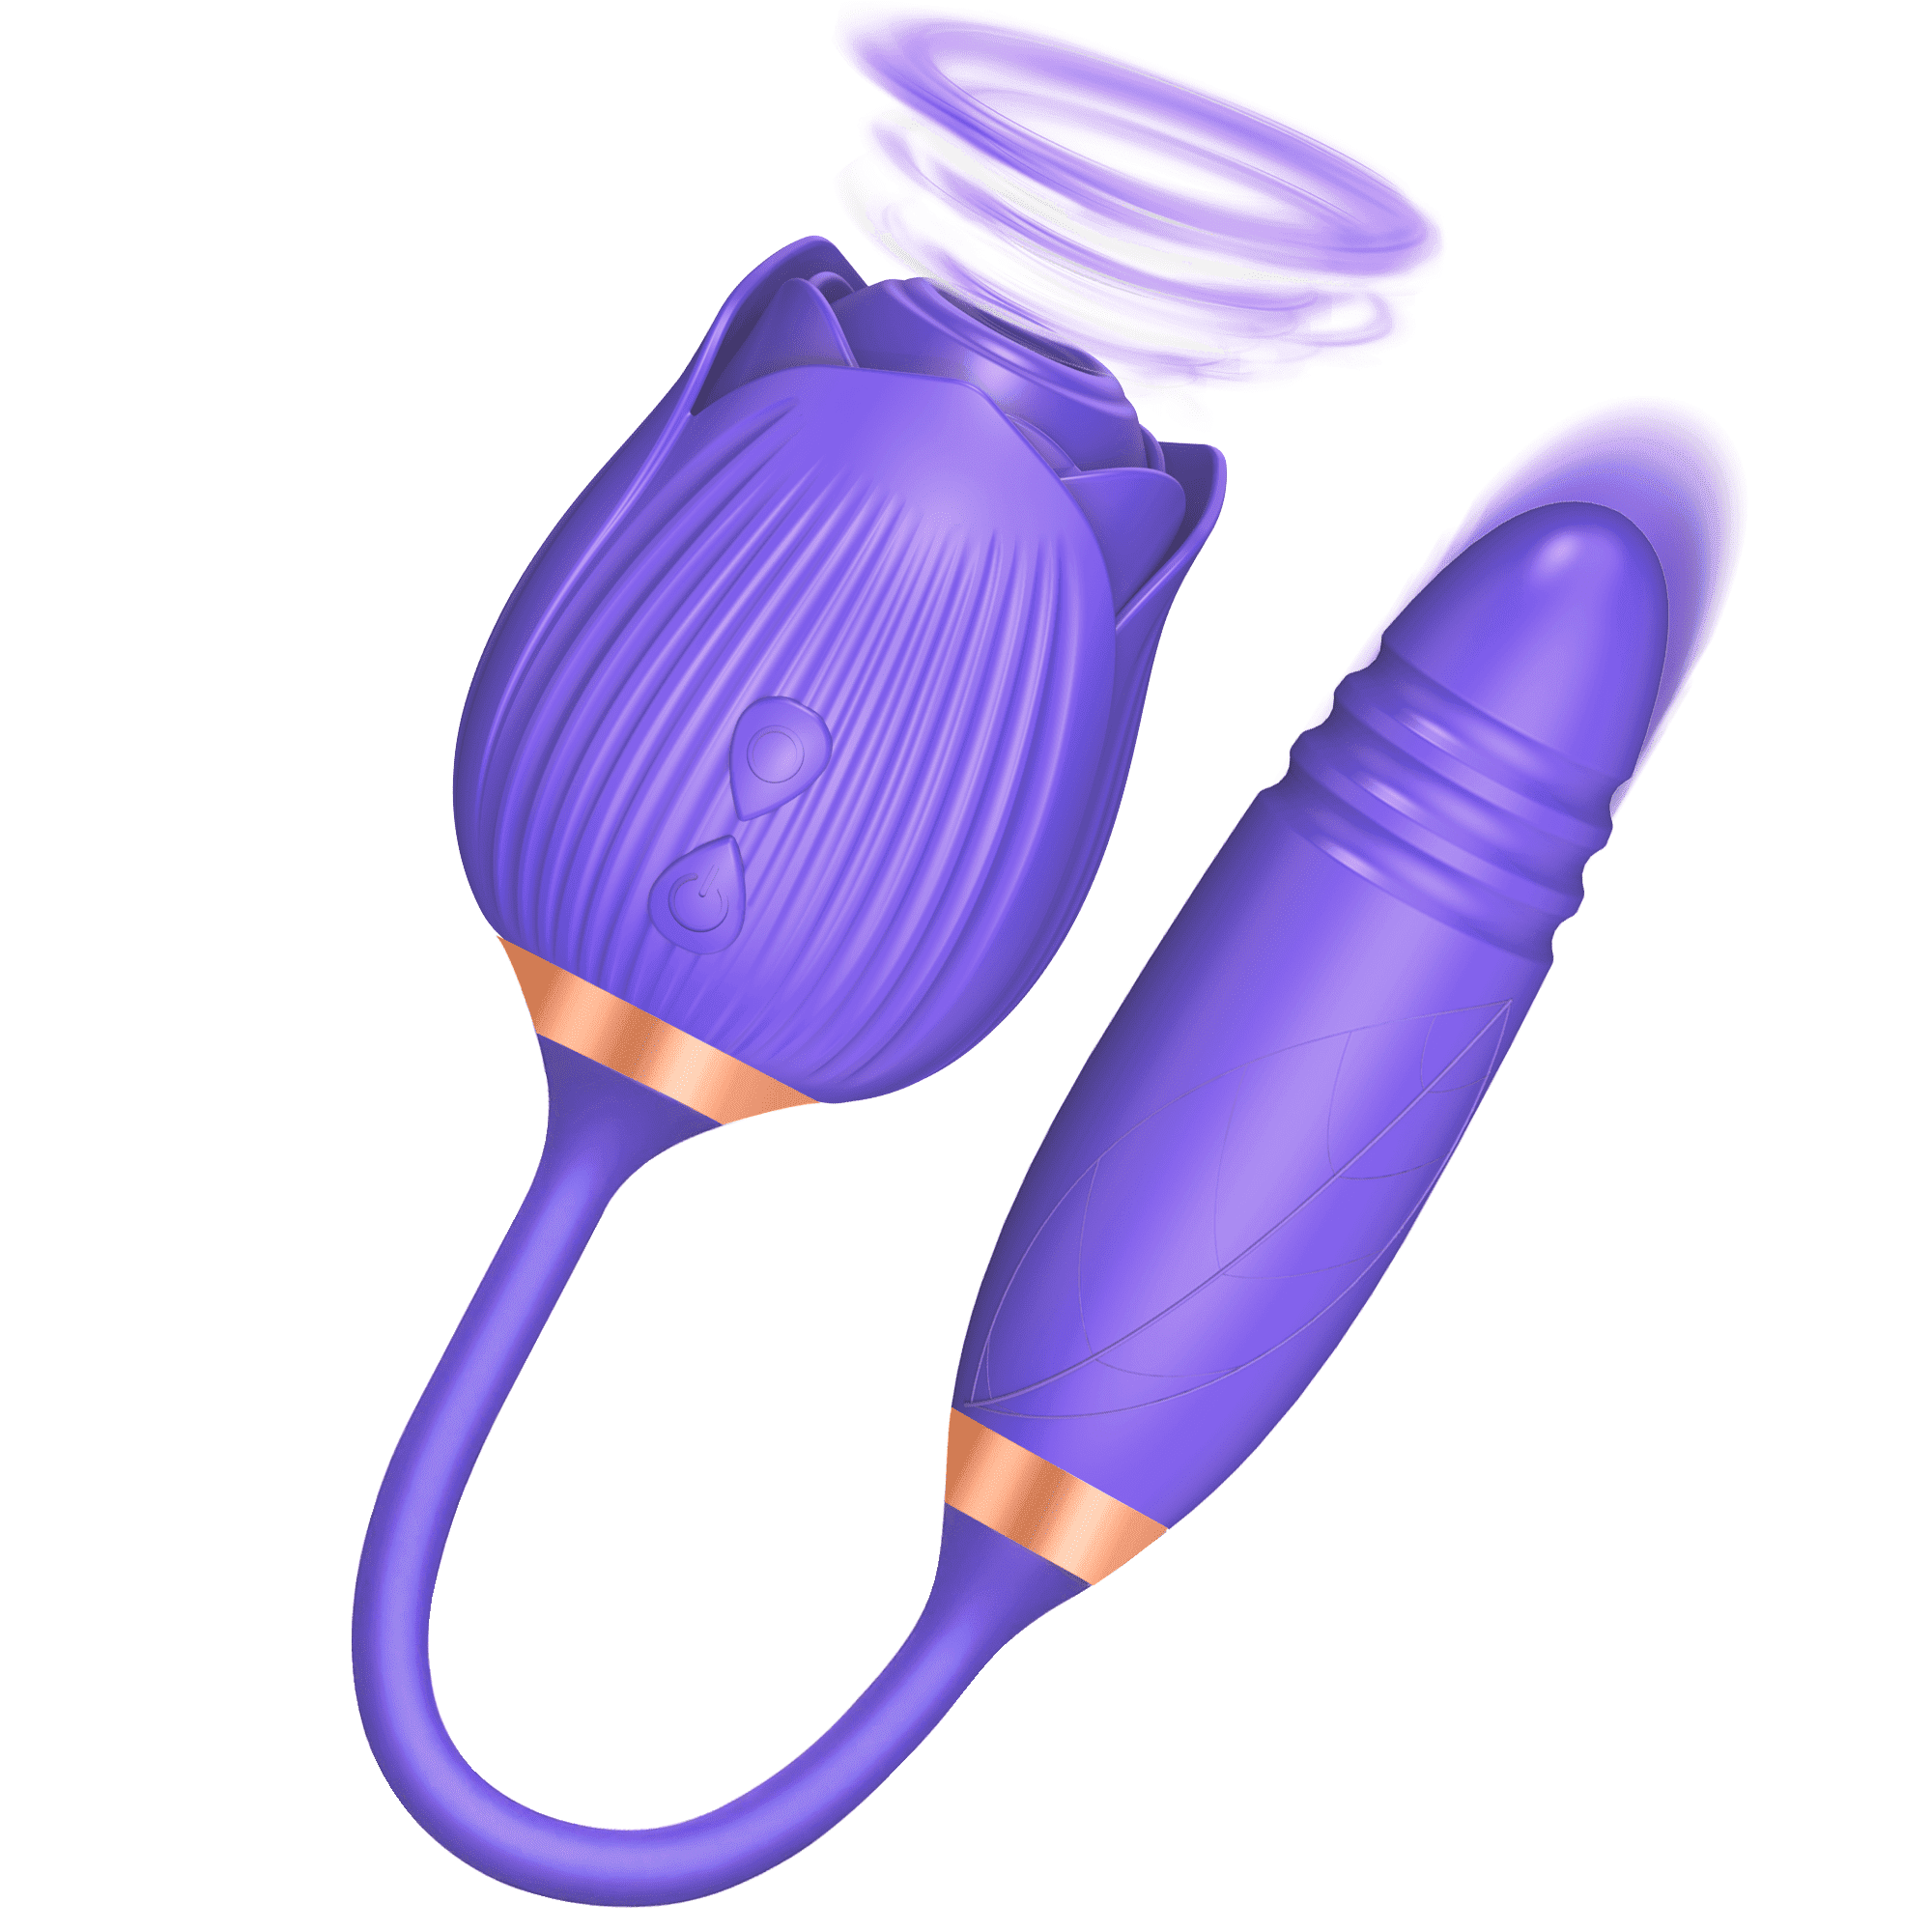 DARZU Vibrators and Adult Sex Toys for Women, Rose Toys Clitoral Stimulator with Dildo Vibrating Egg, Blue Purple picture photo